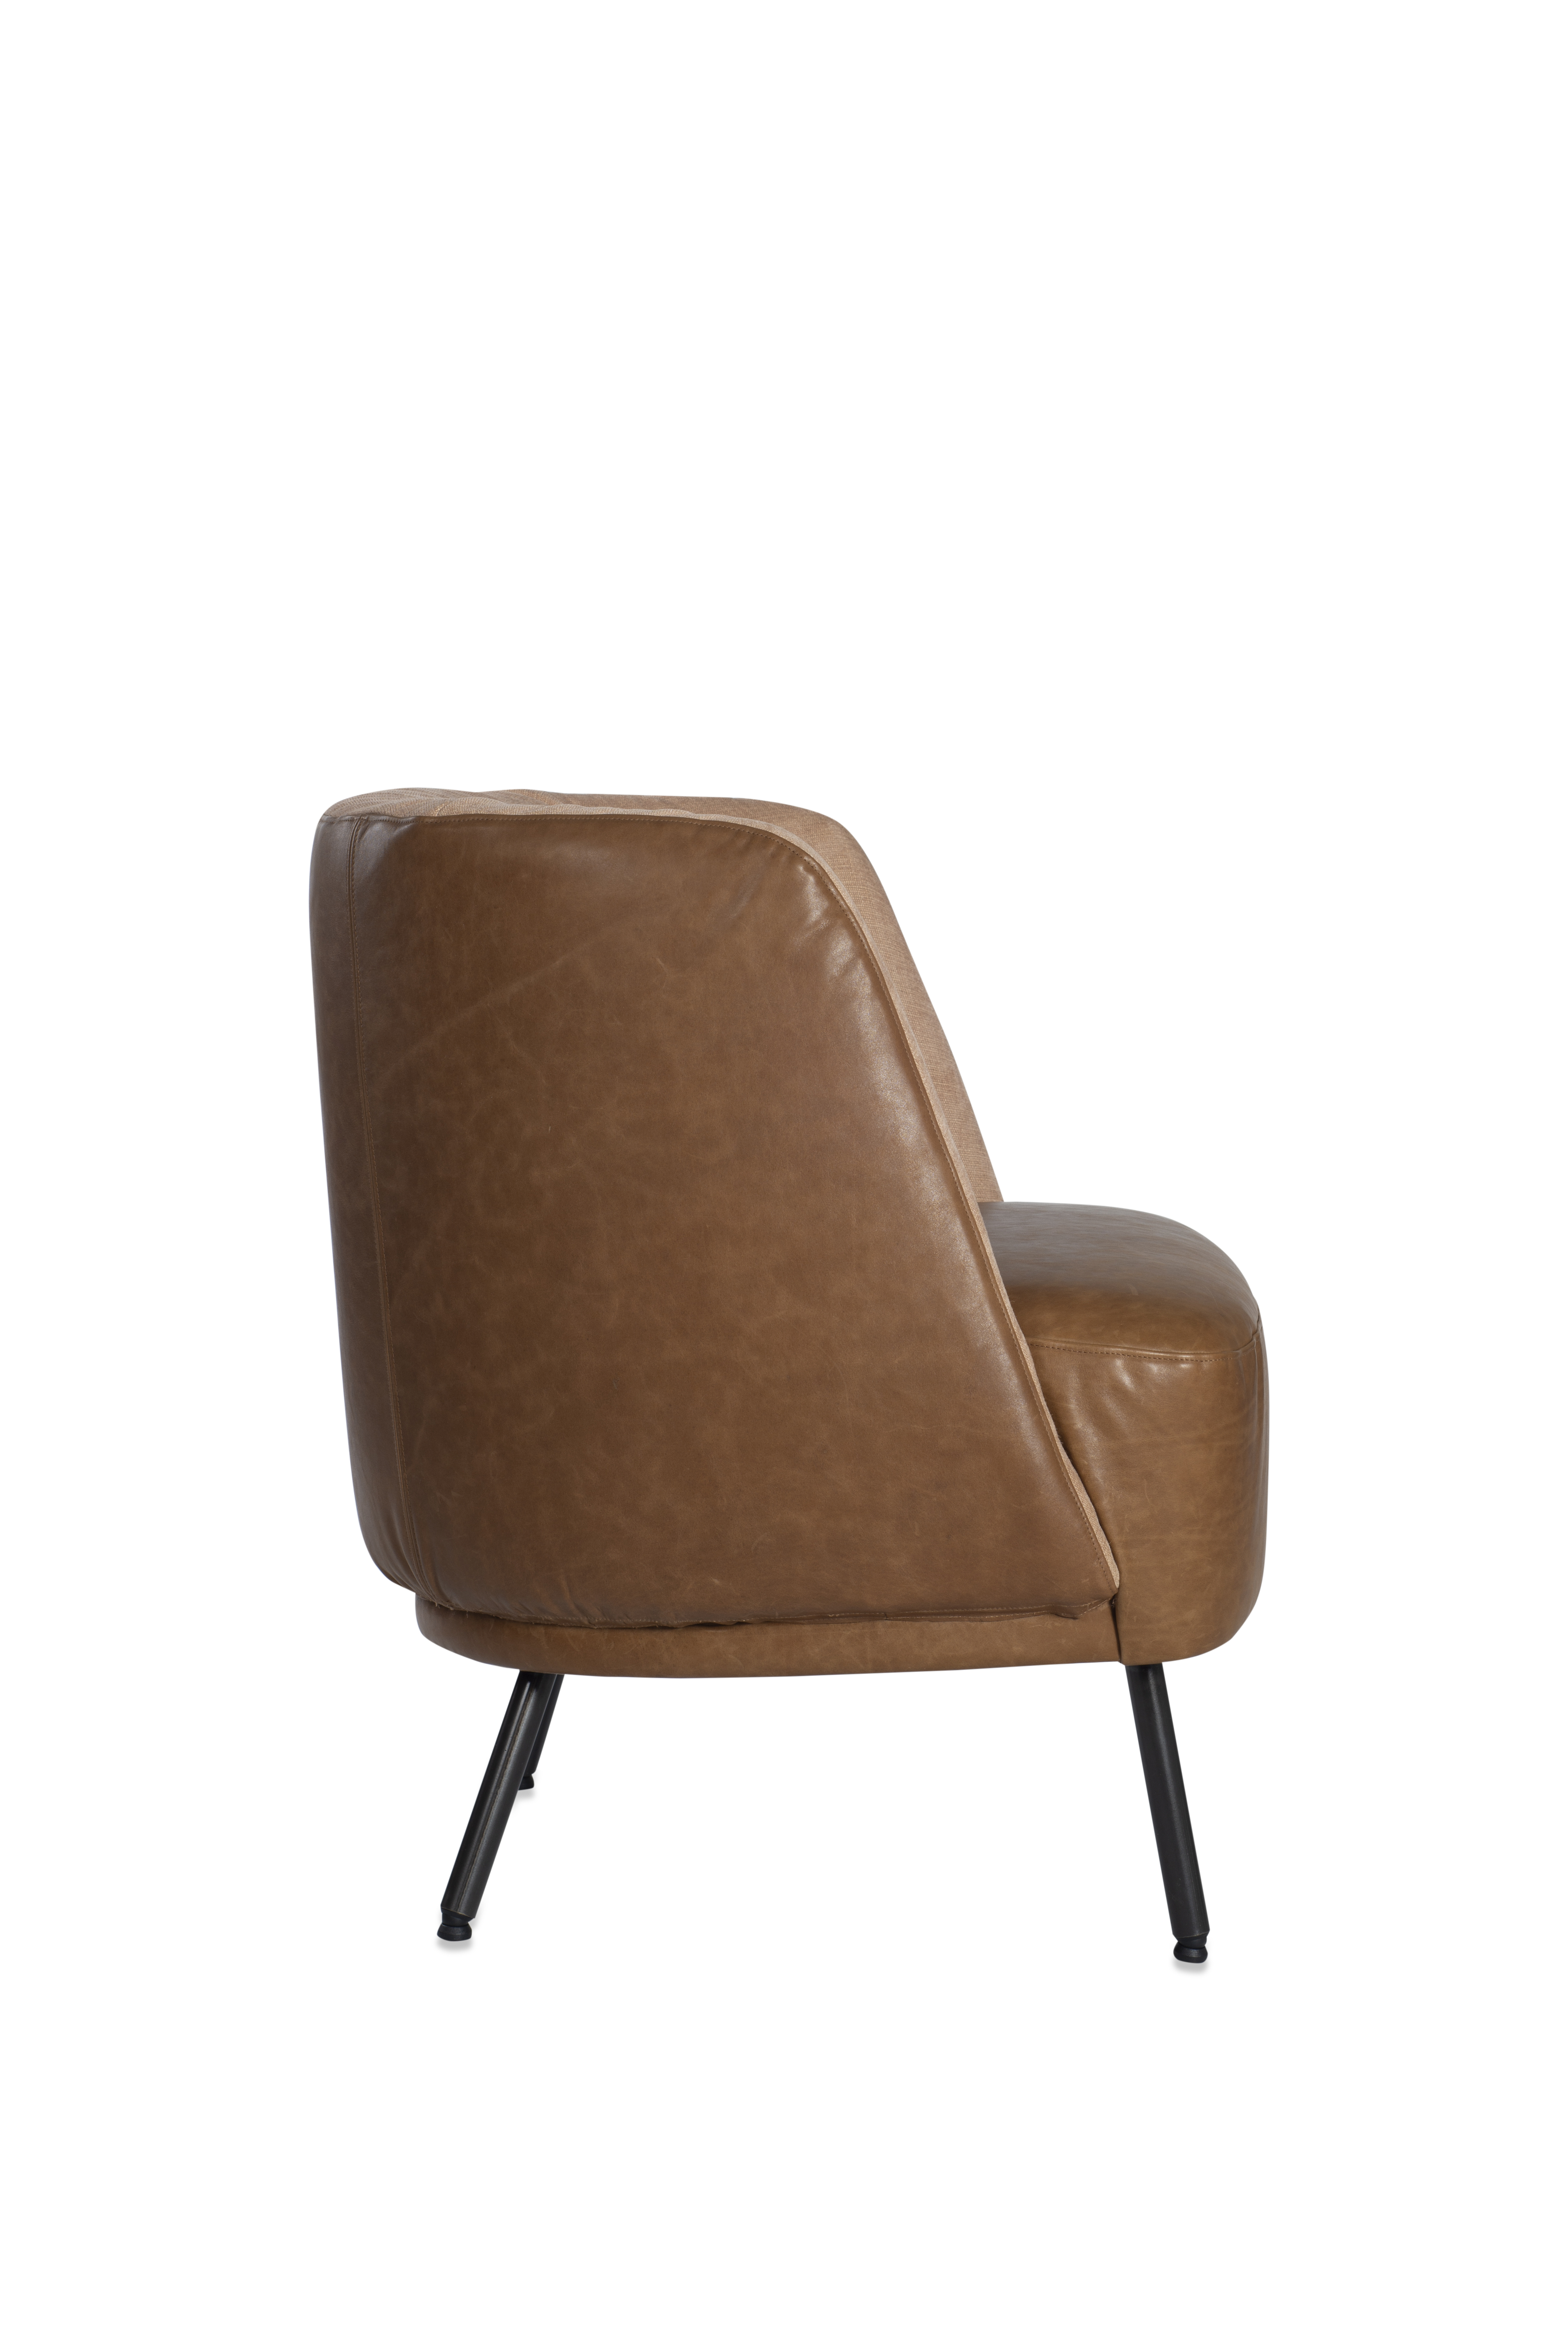 Tray Armchair Luxor Fango Light Stockholm Nude Behind 2